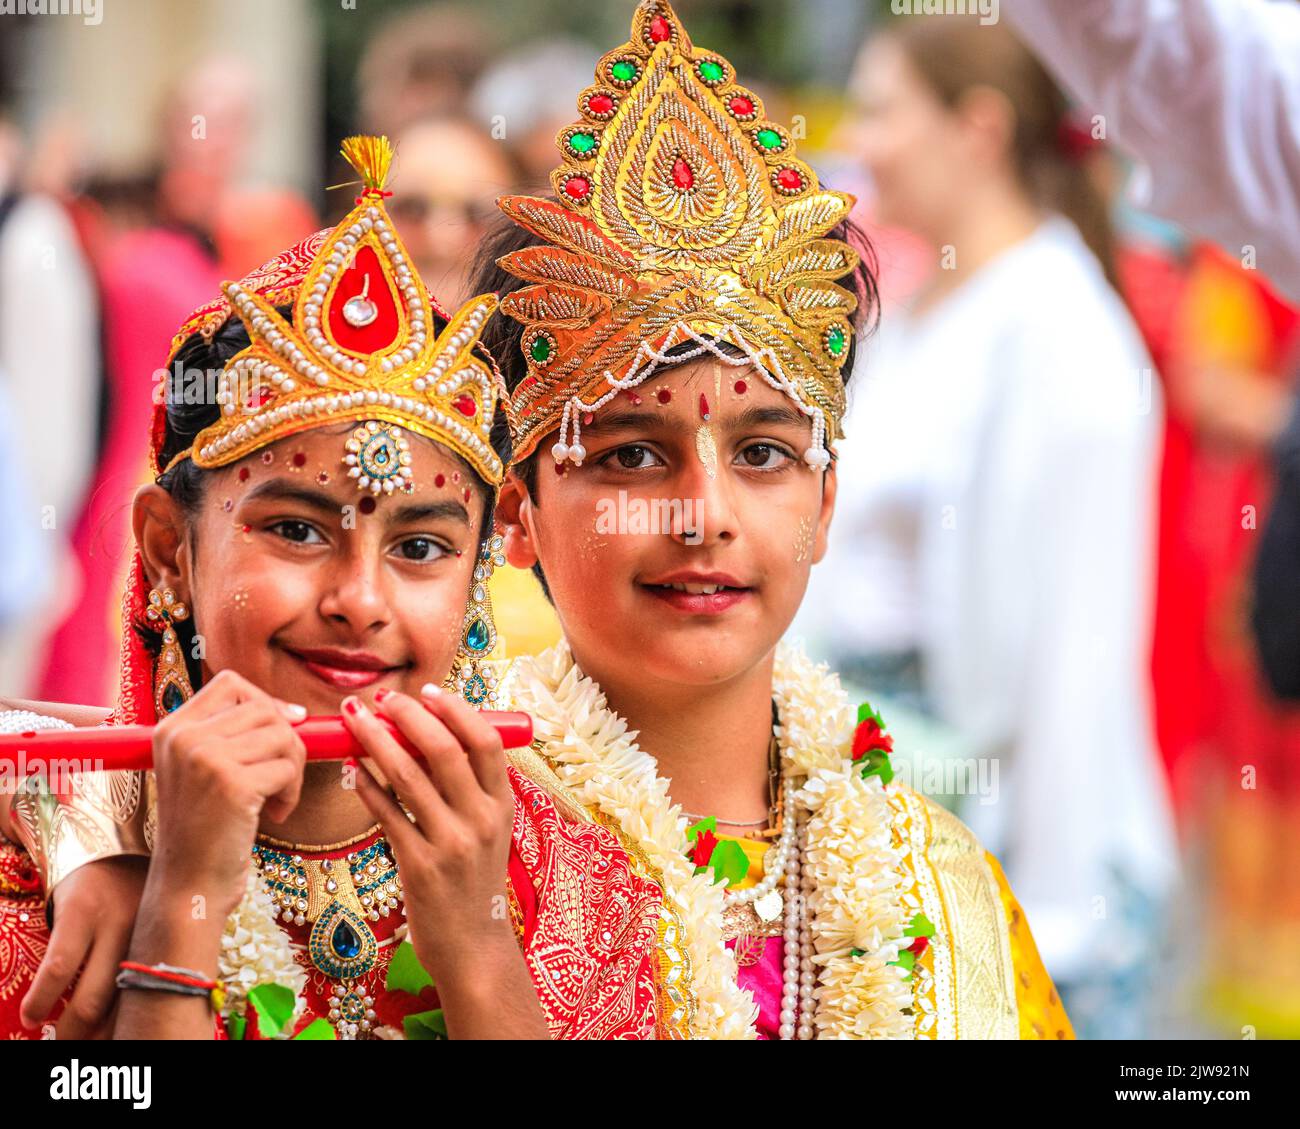 London, UK. 04th Aug, 2022. Two children at the start of the procession represent deities. The Hindu Ratha Yatra Festival (alternative spelling Rathayatra), or Chariot Festival, falls on the 4th of September this year and is celebrated in London with a procession of the chariots and deities from Hyde Park to Trafalgar Square, accompanied by the public, followed festivities, free food and performances in Trafalgar Square. Credit: Imageplotter/Alamy Live News Stock Photo